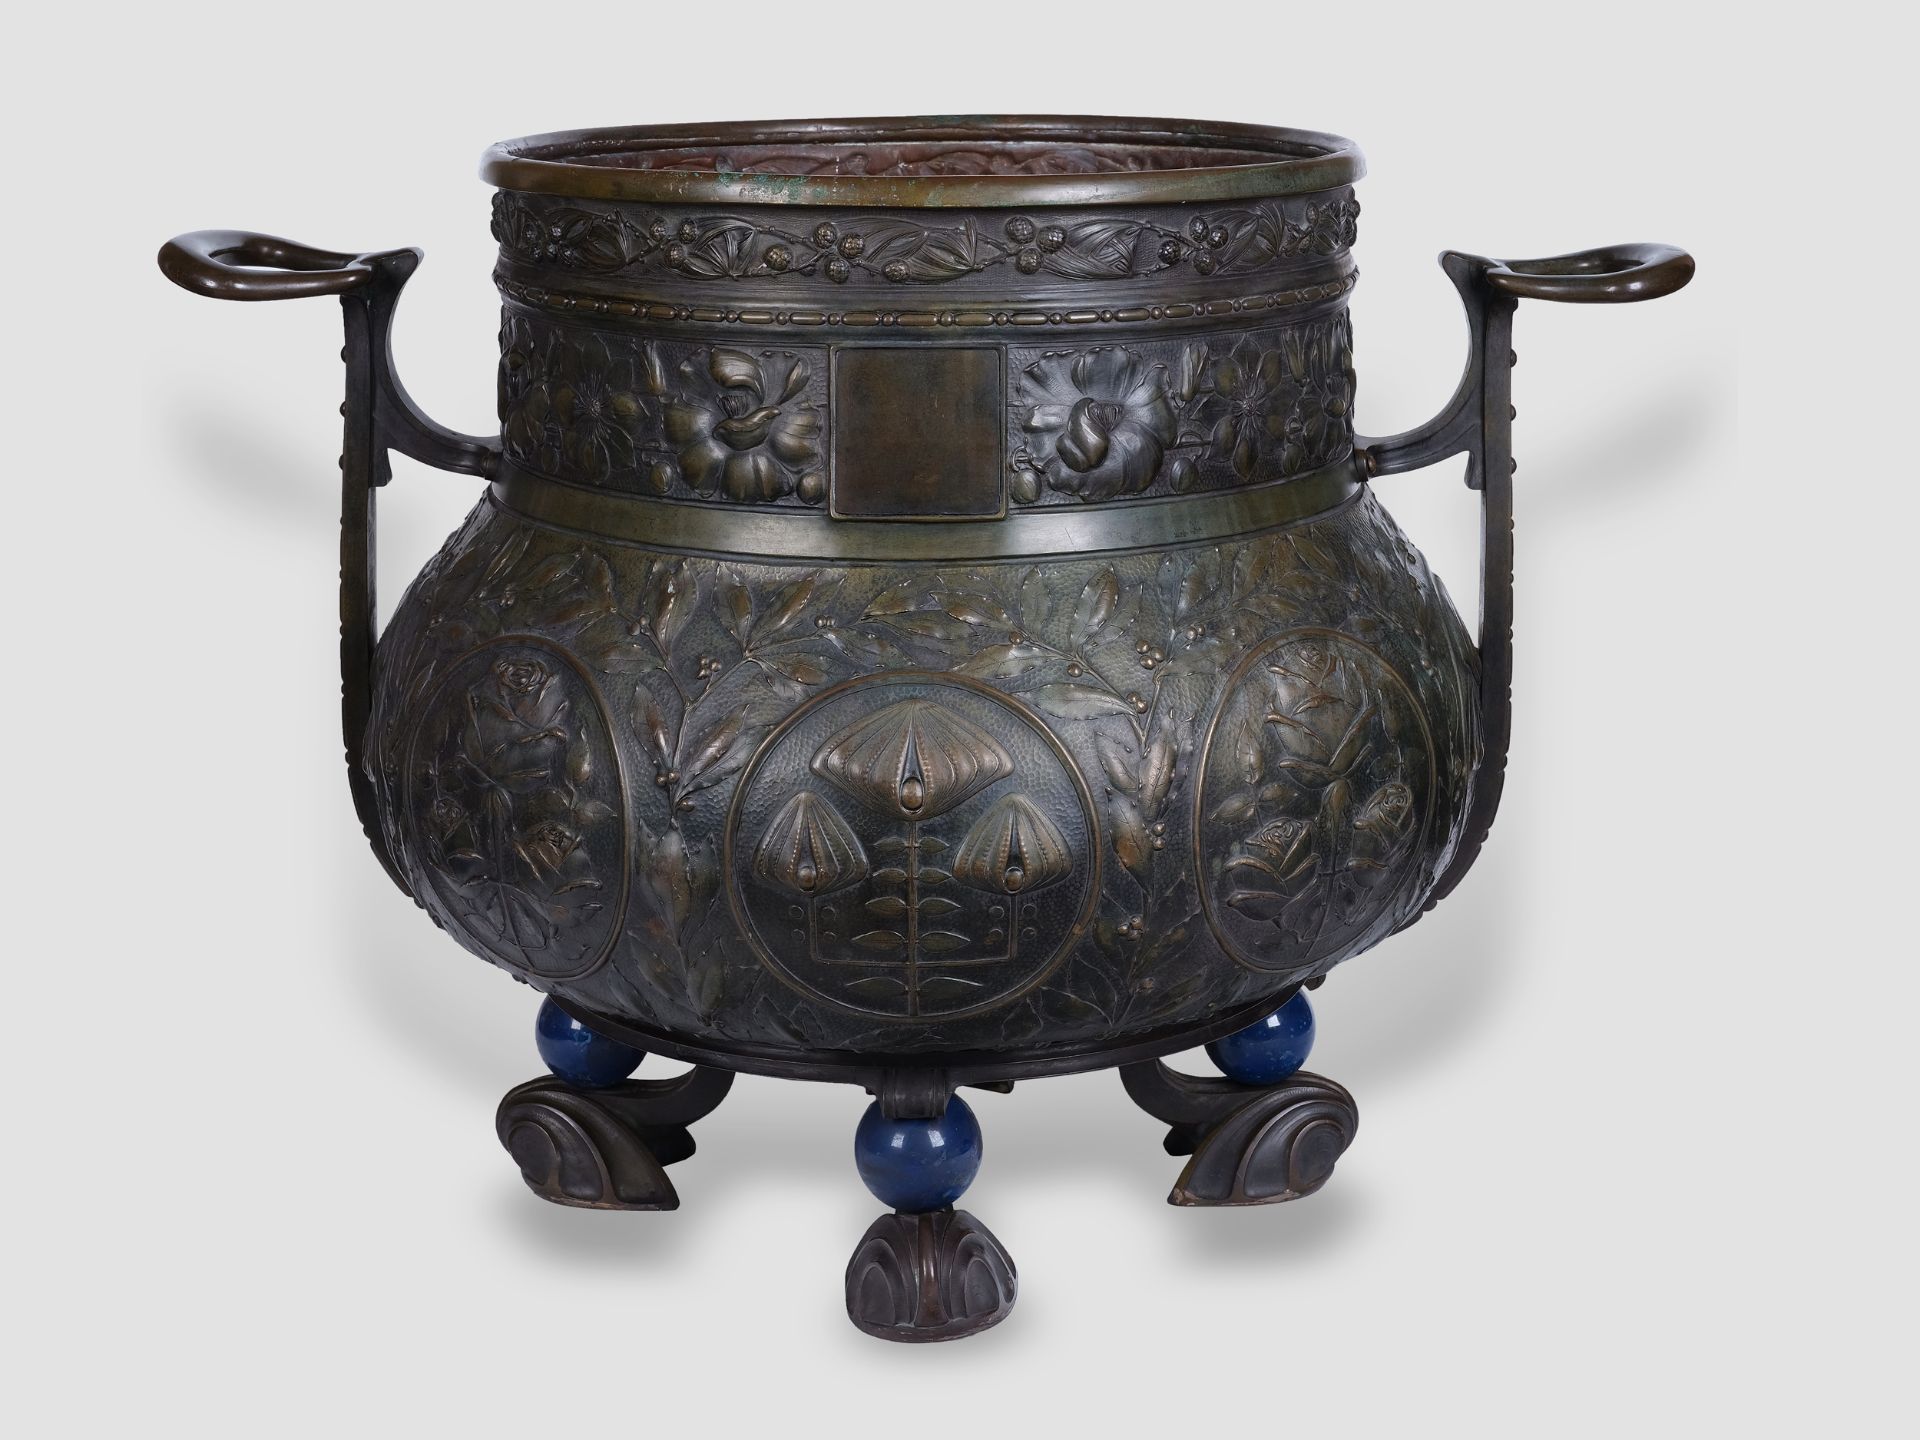 Highly important Russian planter, Modern style, Art Nuovo, Moscow around 1890/1900 - Image 4 of 12